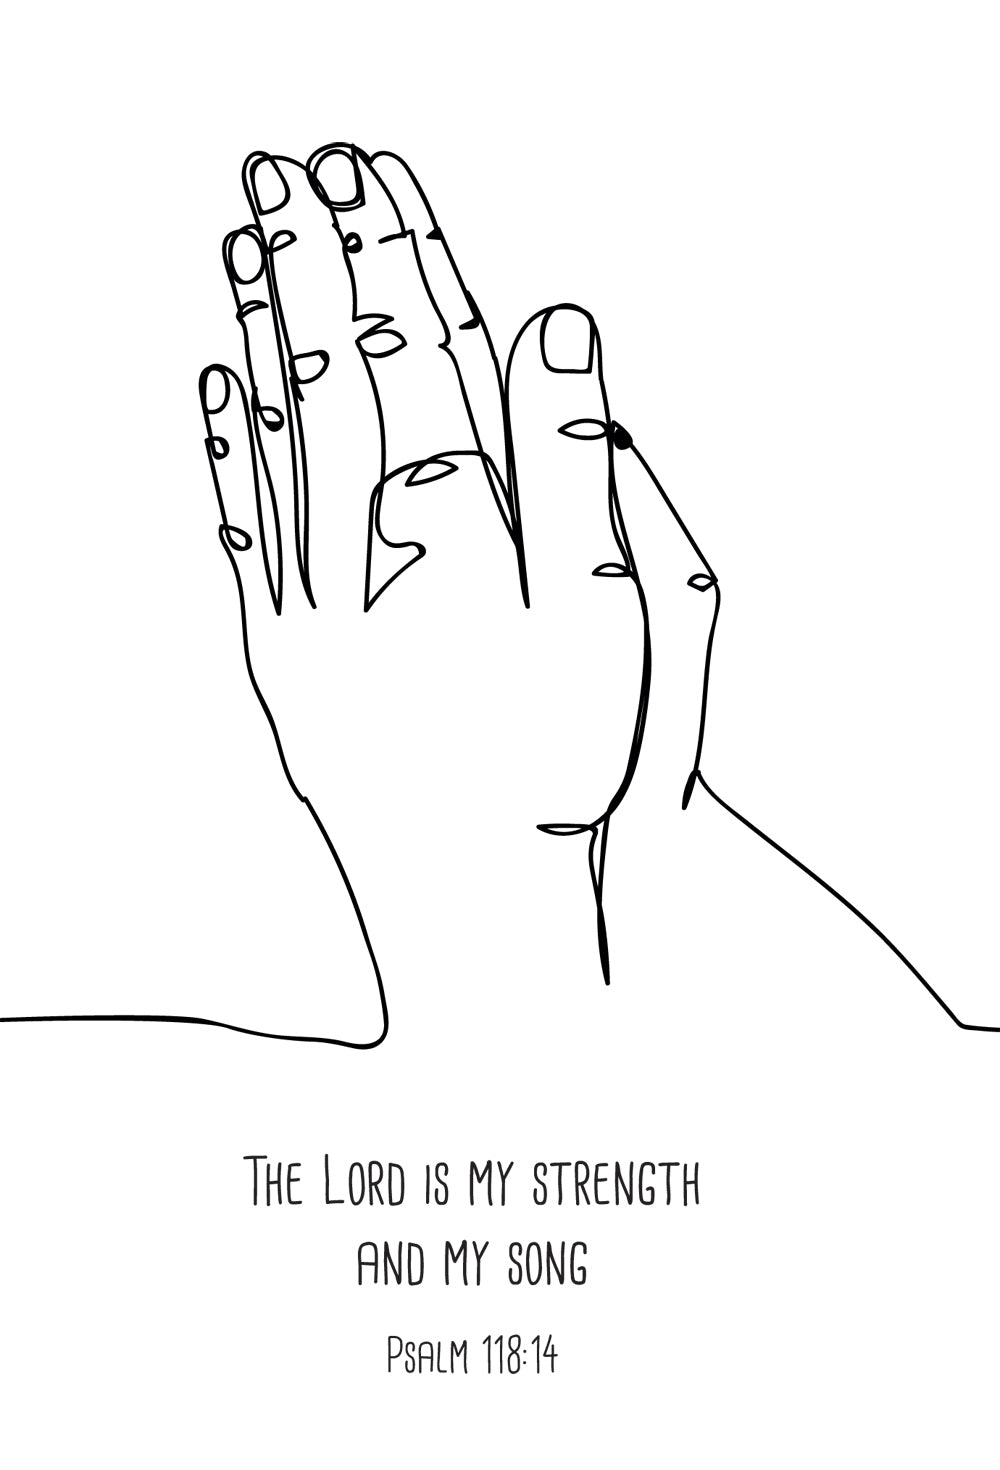 The Lord Is Strength - Hands Std Card Gloss (6 Pack)The Lord Is Strength - Hands Std Card Gloss (6 Pack)